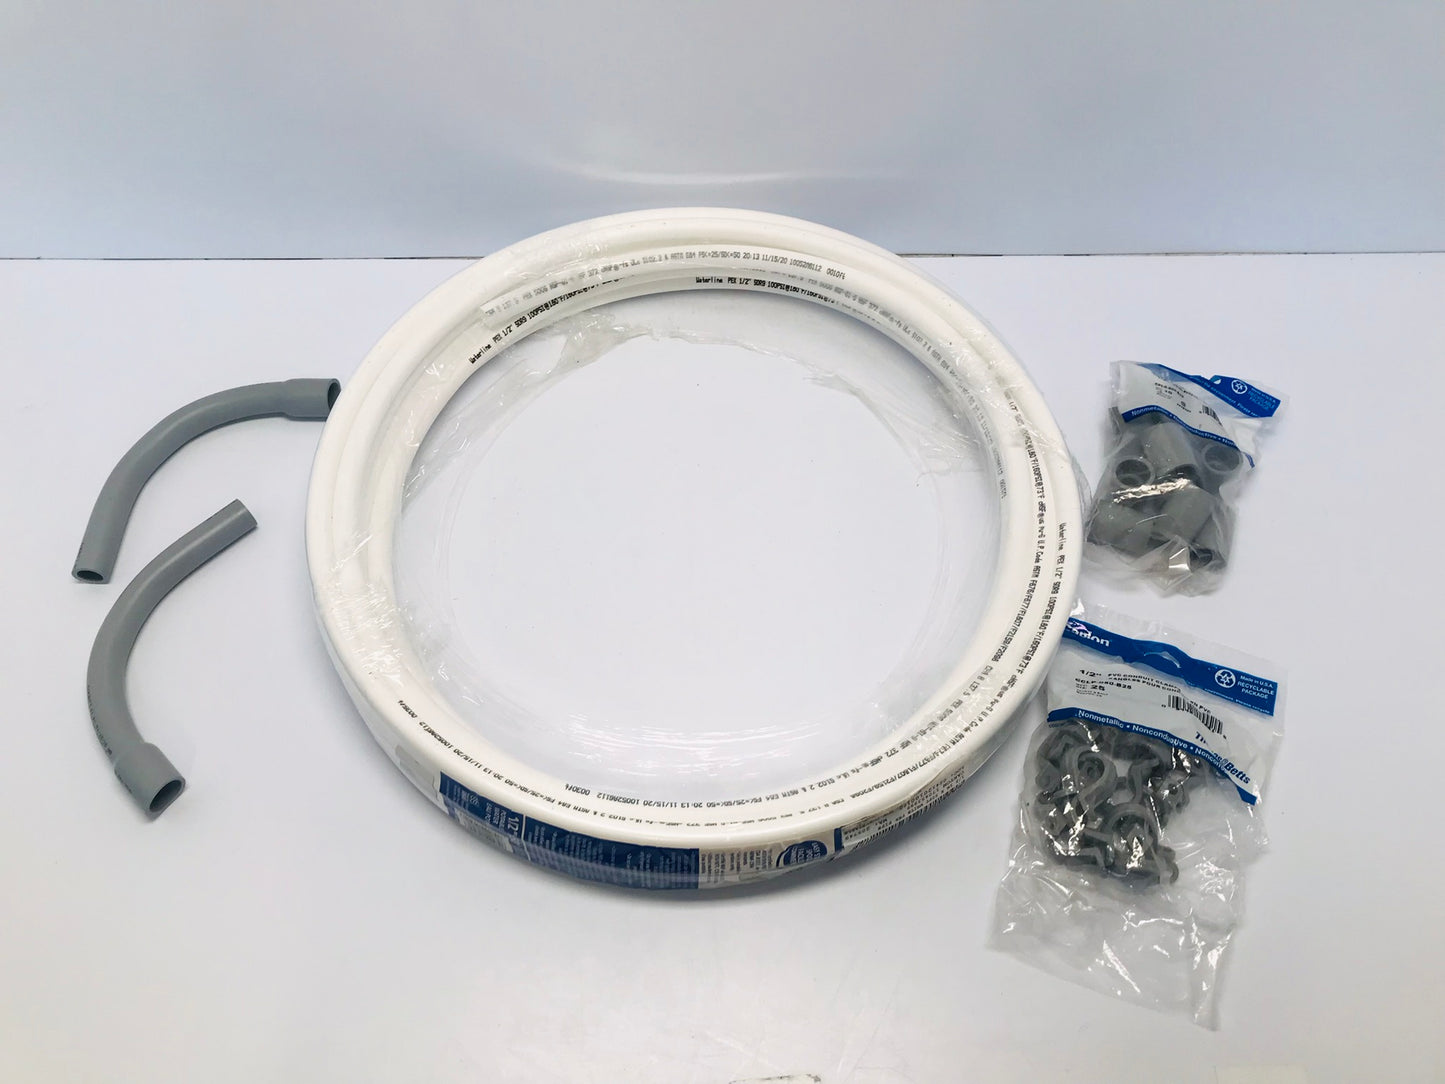 New 12 inch x50 Feet White PEX Pipe Water  Sprinkler With Conduit Clamps New Sold As A Set